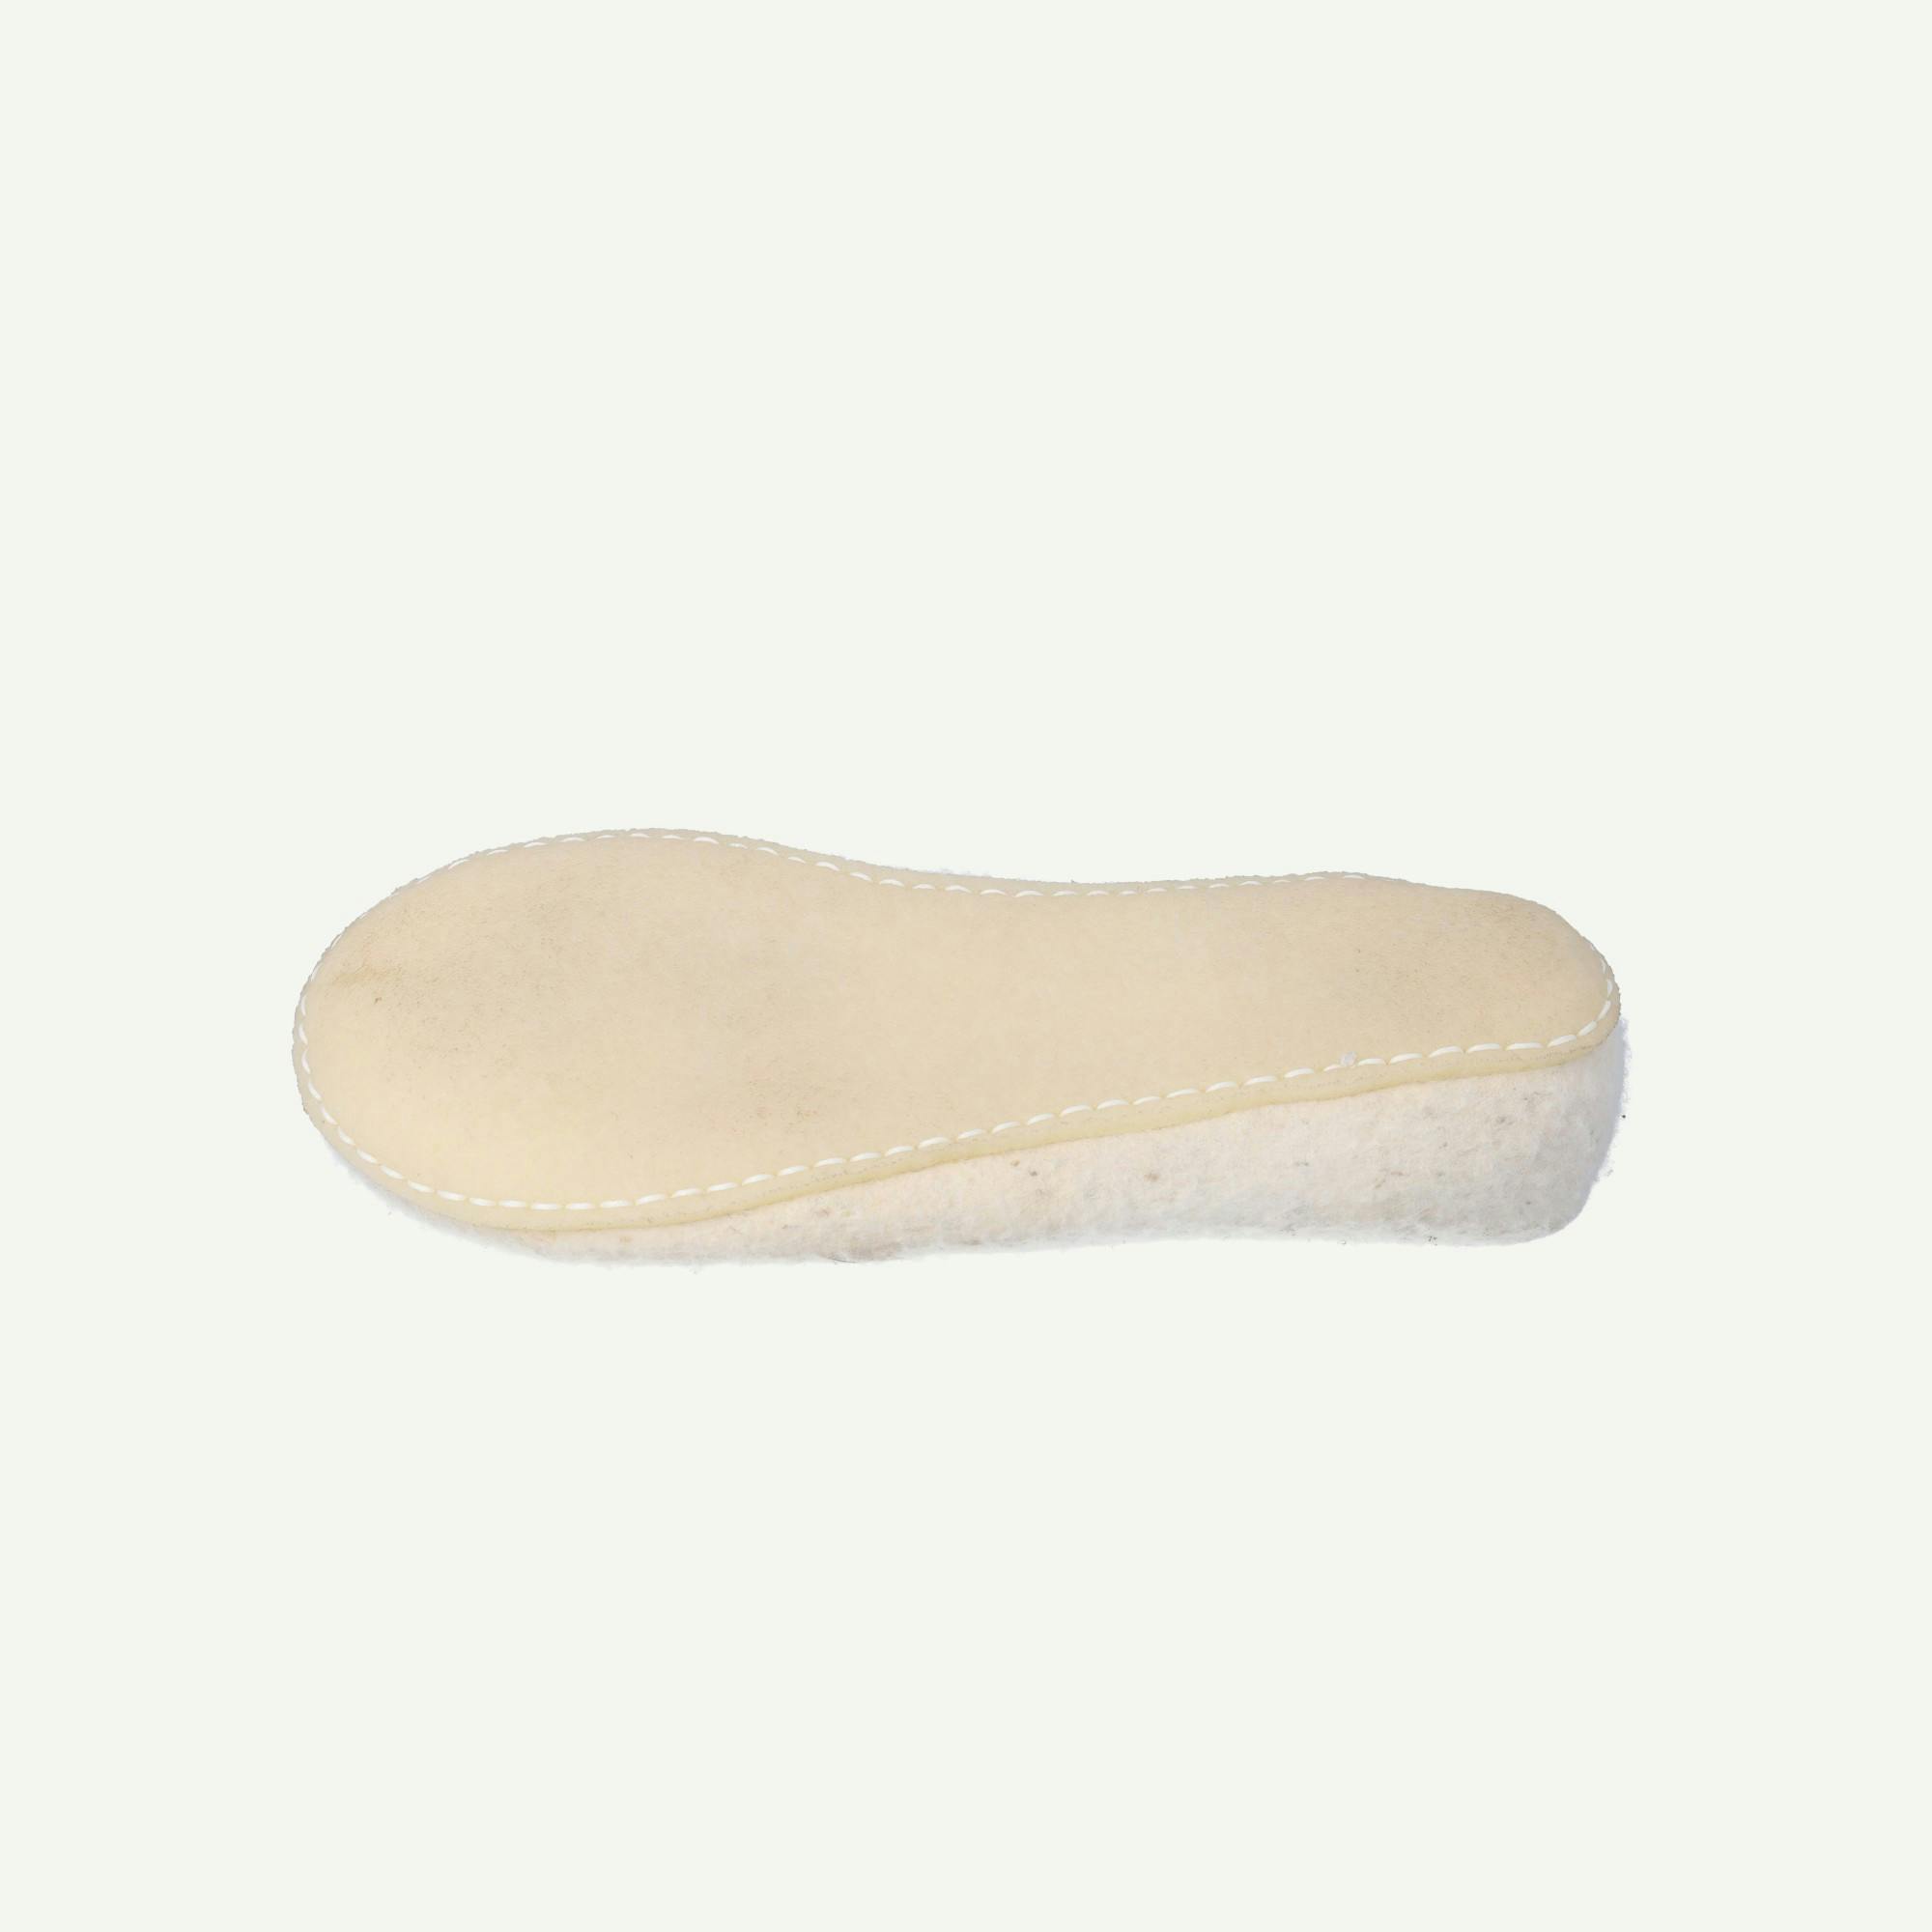 Finisterre Bowmont Slippers imperfection 2